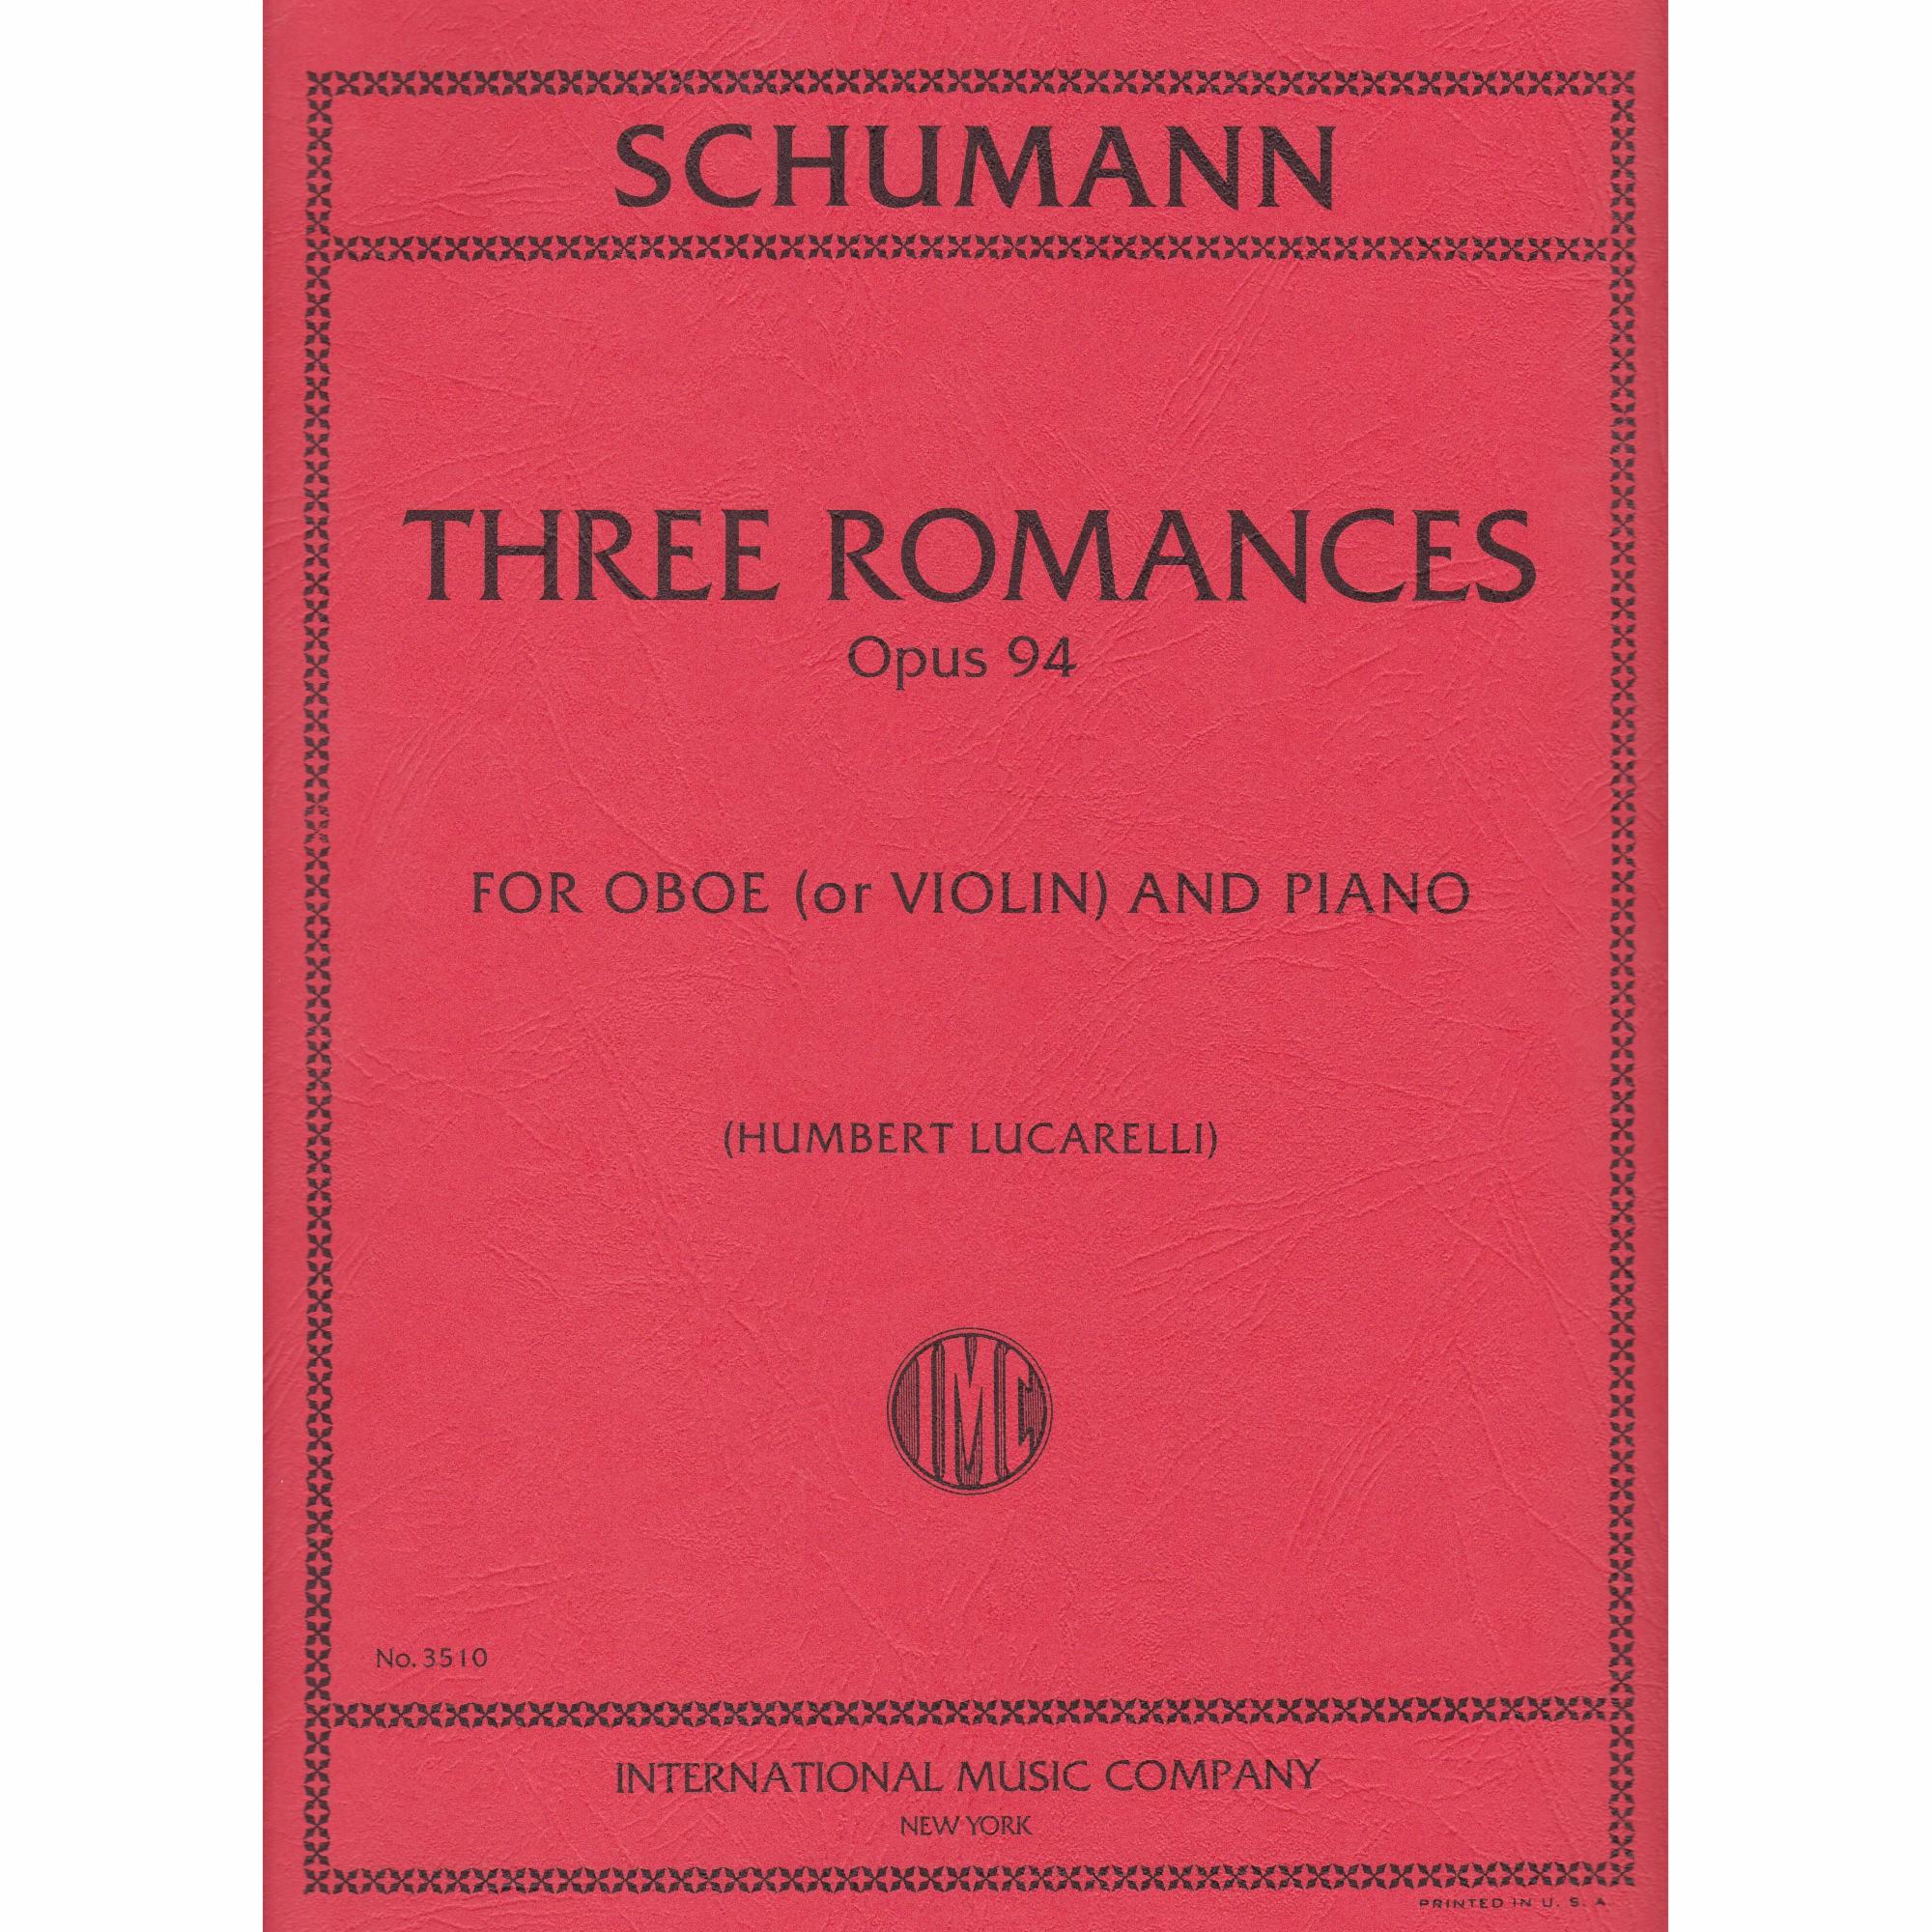 Three Romances for Violin and Piano, Op. 94